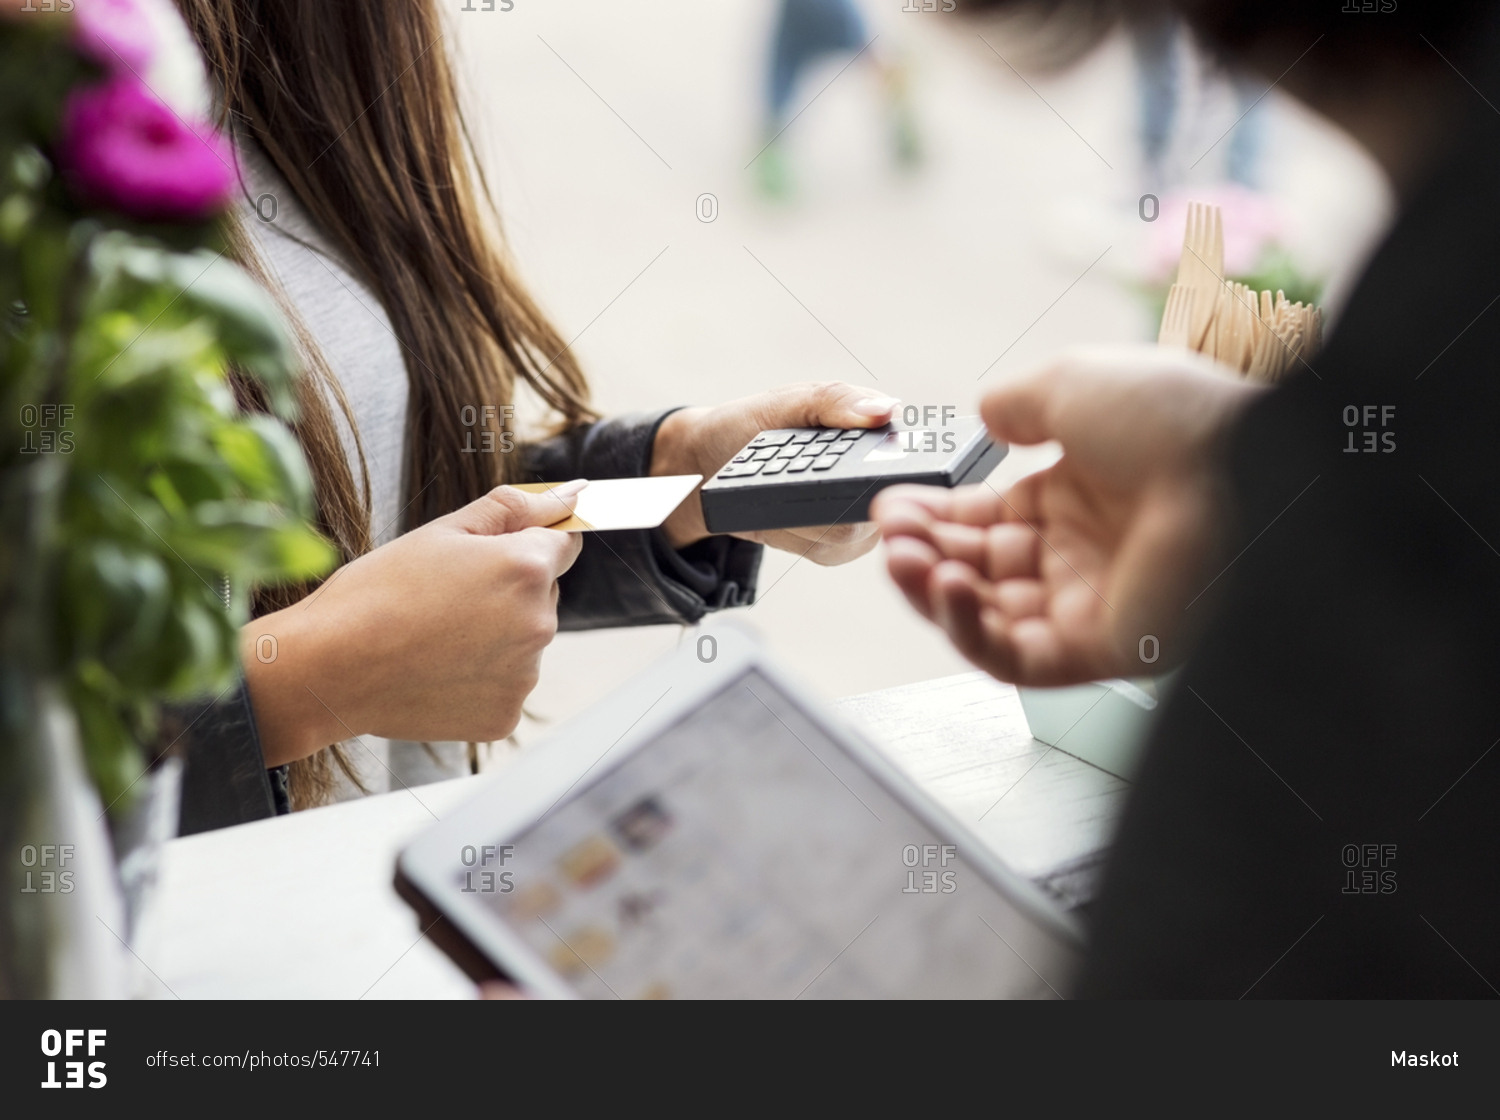 Midsection of female customer paying through card reader while owner holding digital tablet in food truck